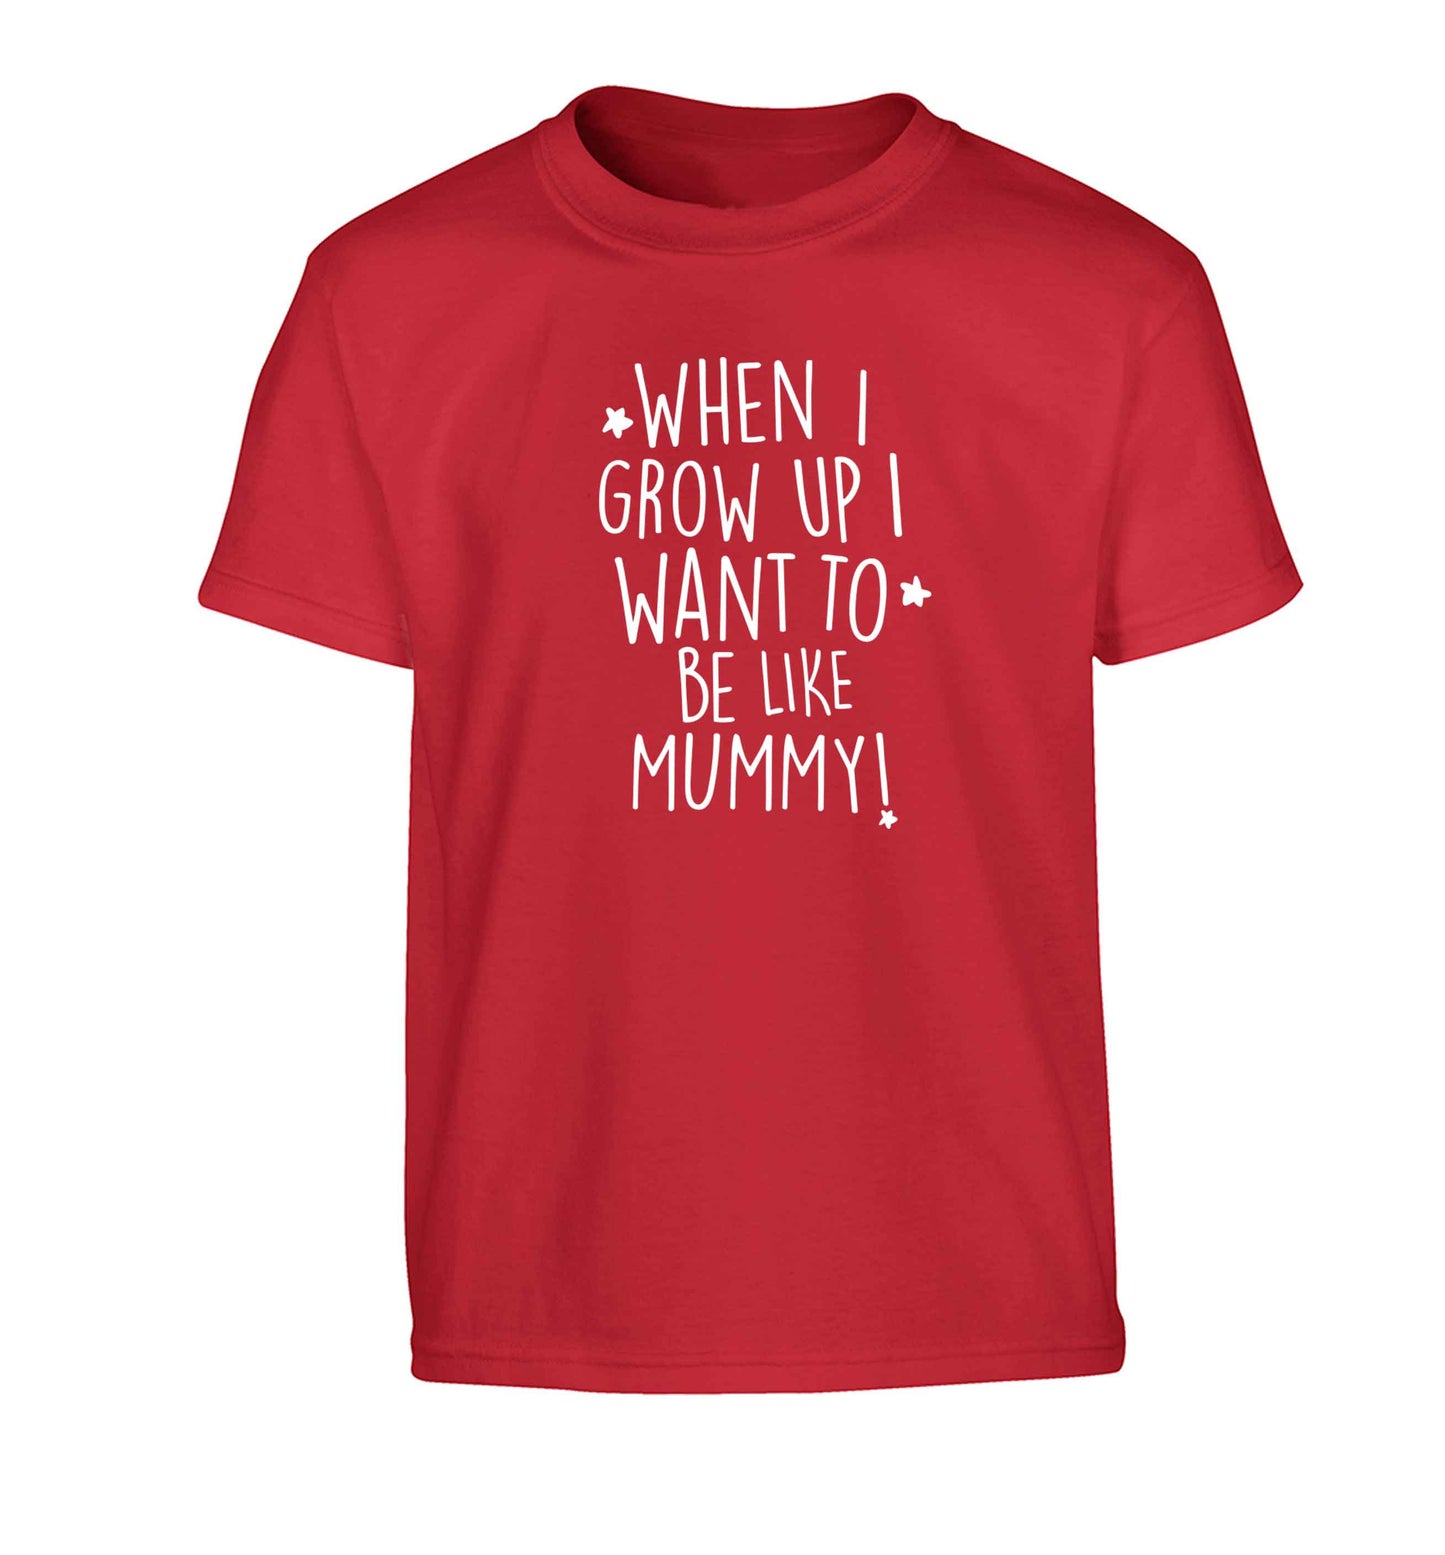 When I grow up I want to be like my mummy Children's red Tshirt 12-13 Years